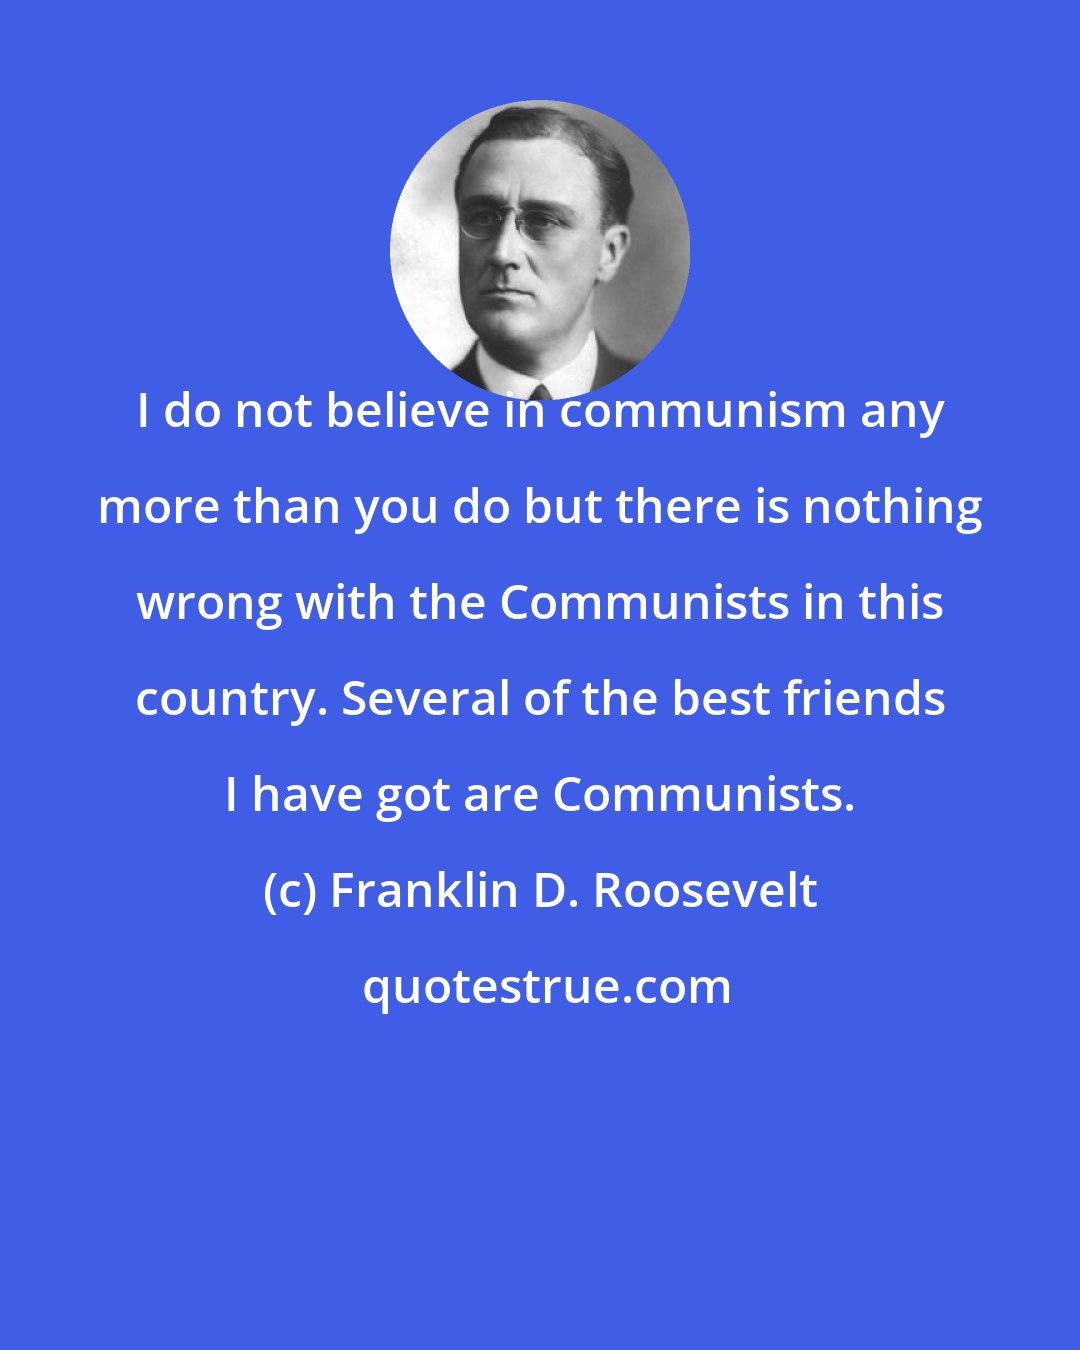 Franklin D. Roosevelt: I do not believe in communism any more than you do but there is nothing wrong with the Communists in this country. Several of the best friends I have got are Communists.